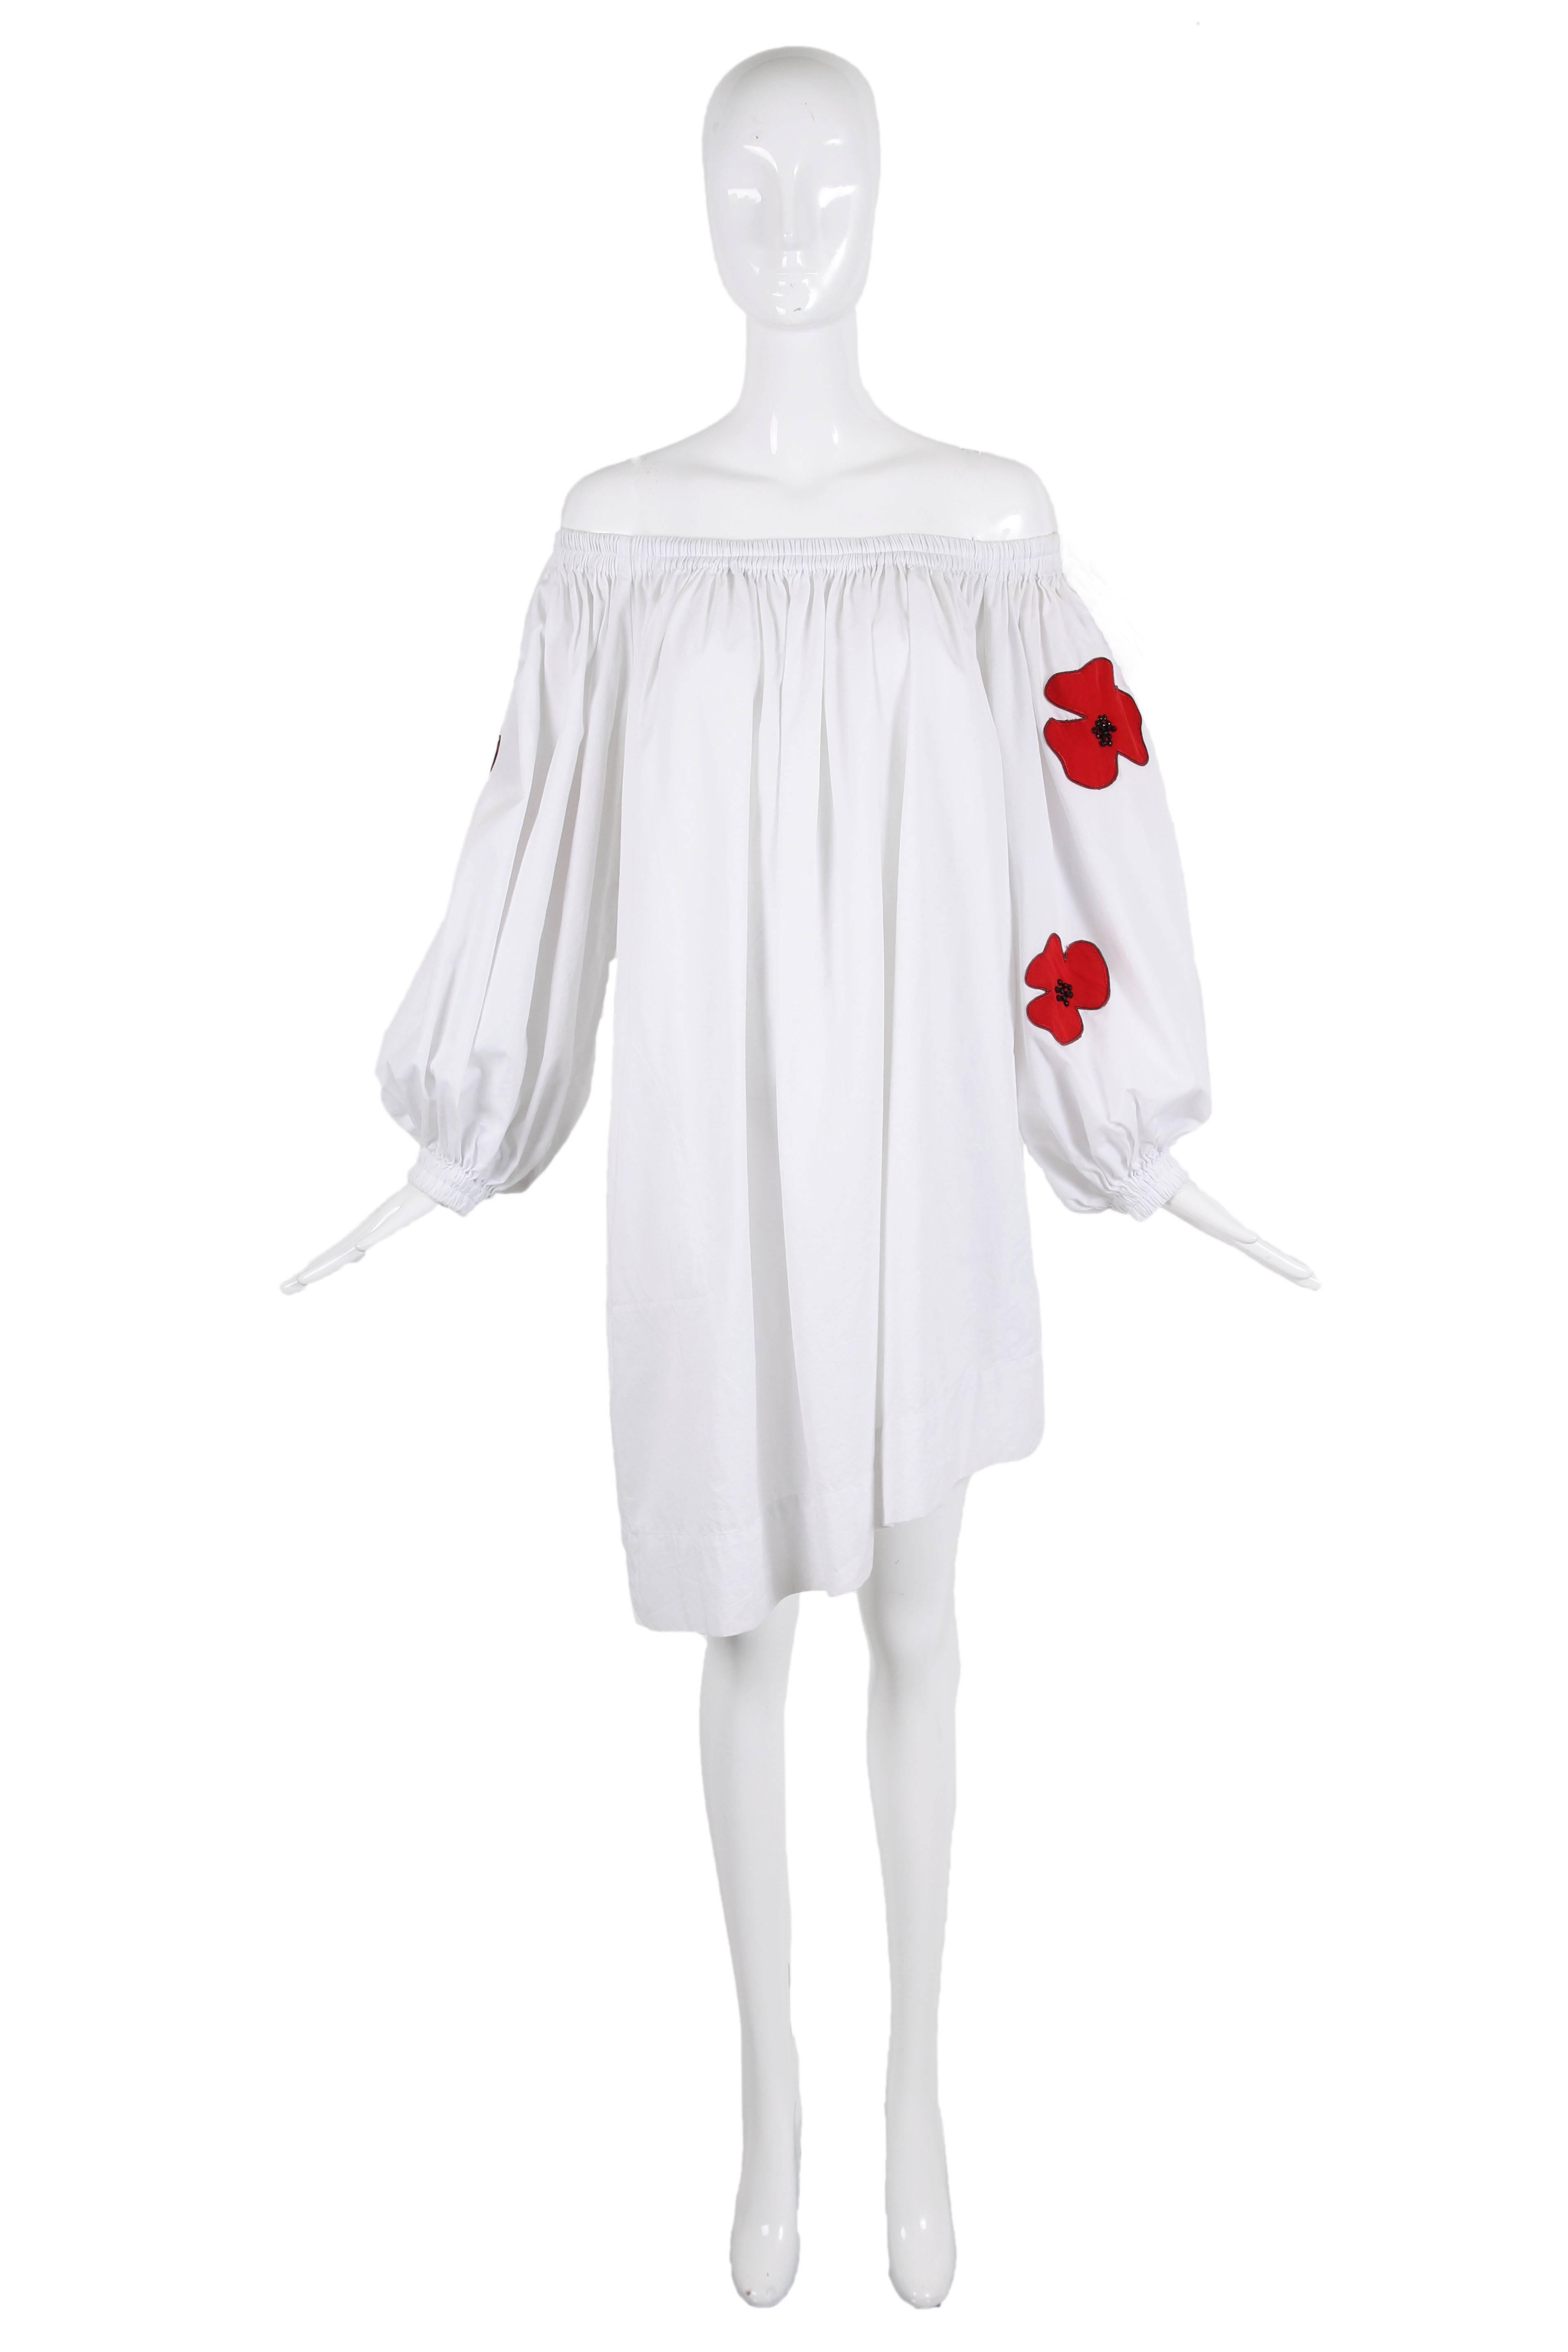 Yves Saint Laurent white cotton off the shoulder day dress with an asymmetric hem and poppy appliqués at sleeves. Features oversized 3/4 balloon sleeves with gathered elastic cuffs and hidden pockets at either side. In excellent condition/ Size tag